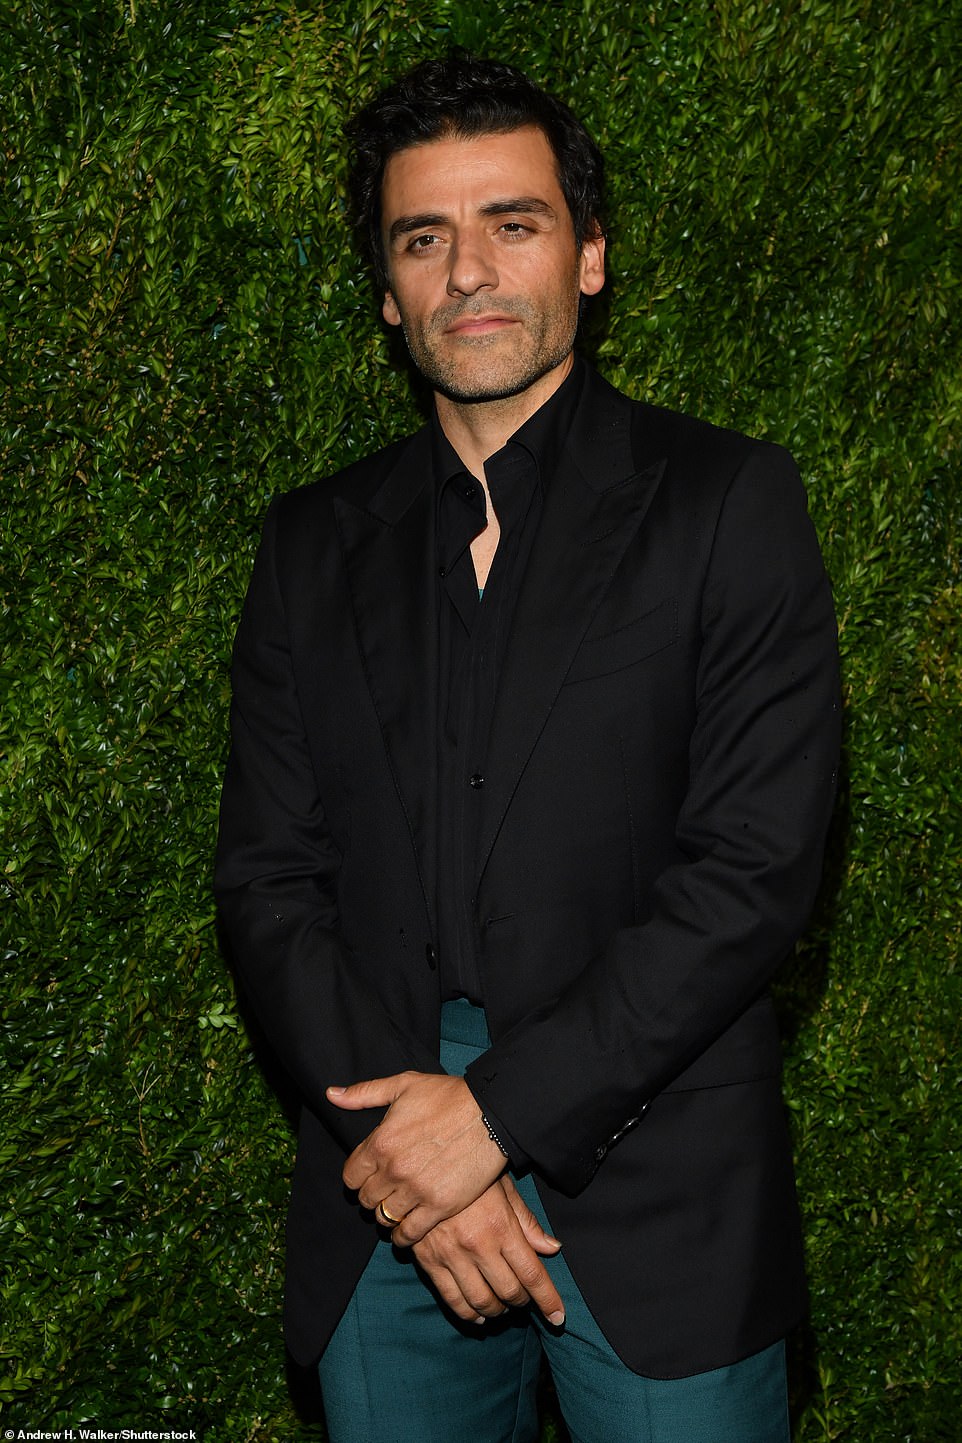 Dapper: Star Wars: The Force Awakens actor Oscar Isaac, 44, looked handsome as ever in a black suit jacket and shirt which he paired with green/blue trousers